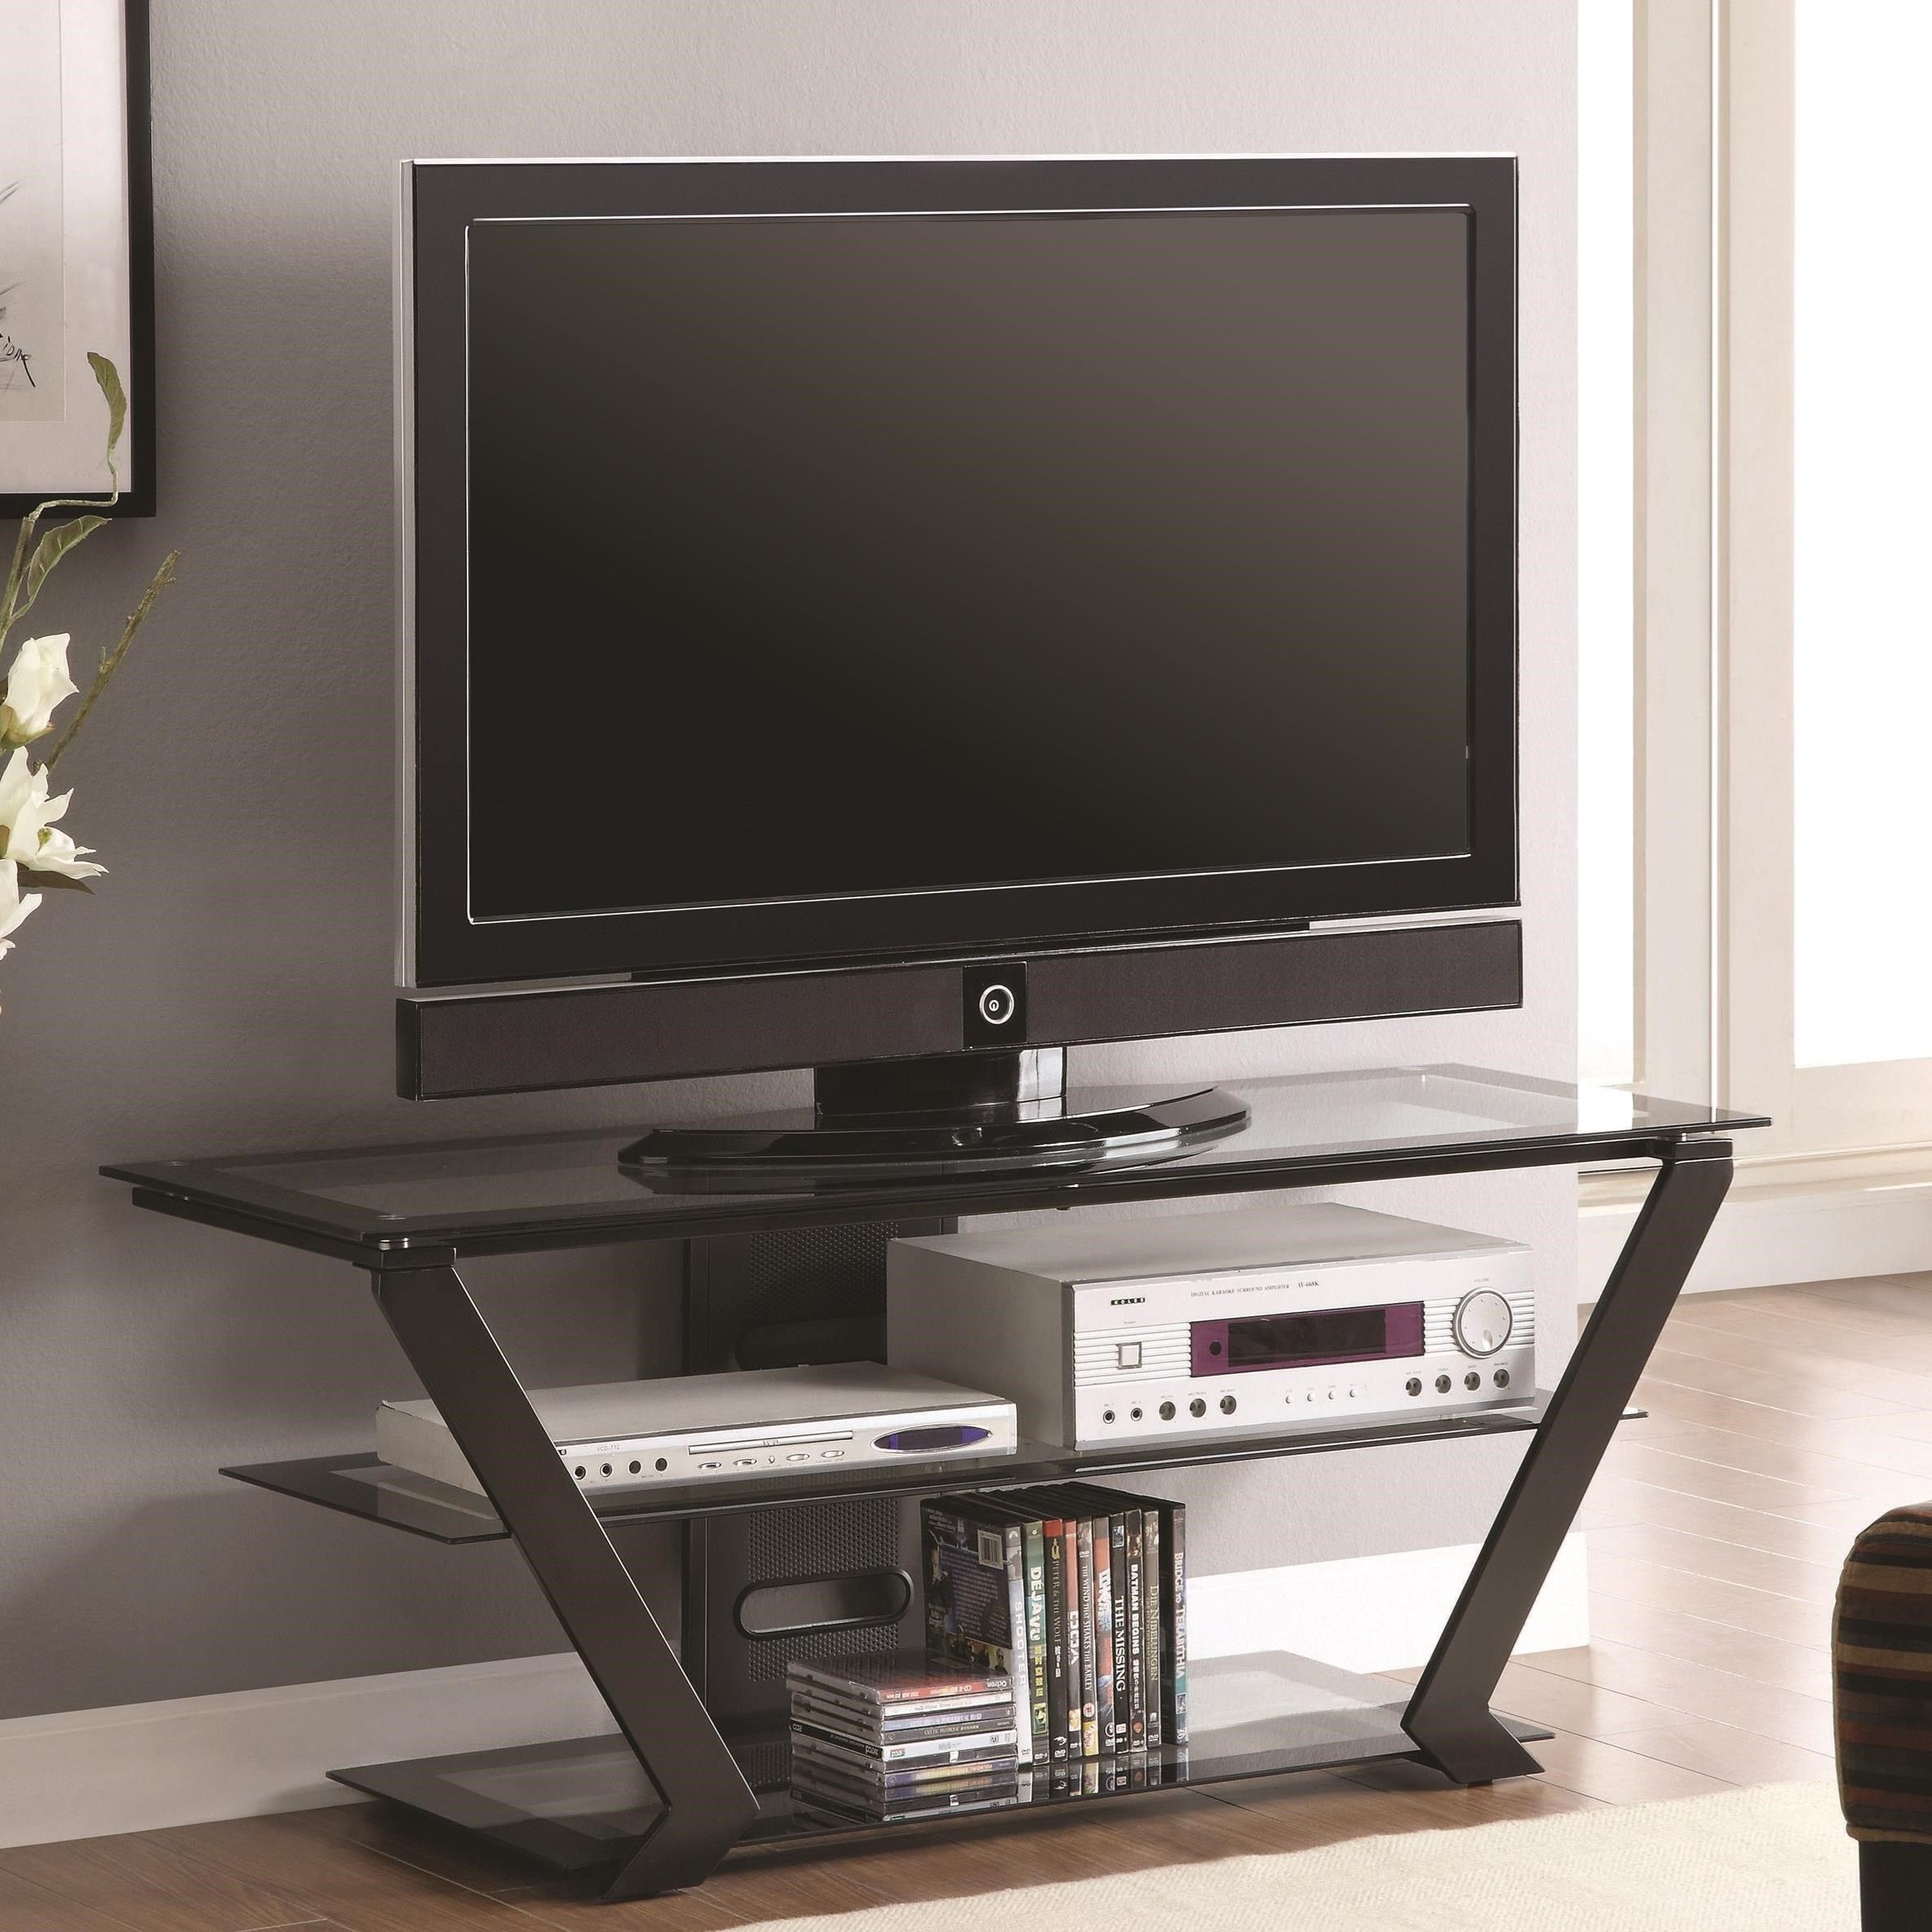 Coaster Tv Stands 701370 Contemporary Tv Stand | Arwood's Furniture Intended For Oaklee Tv Stands (View 13 of 20)